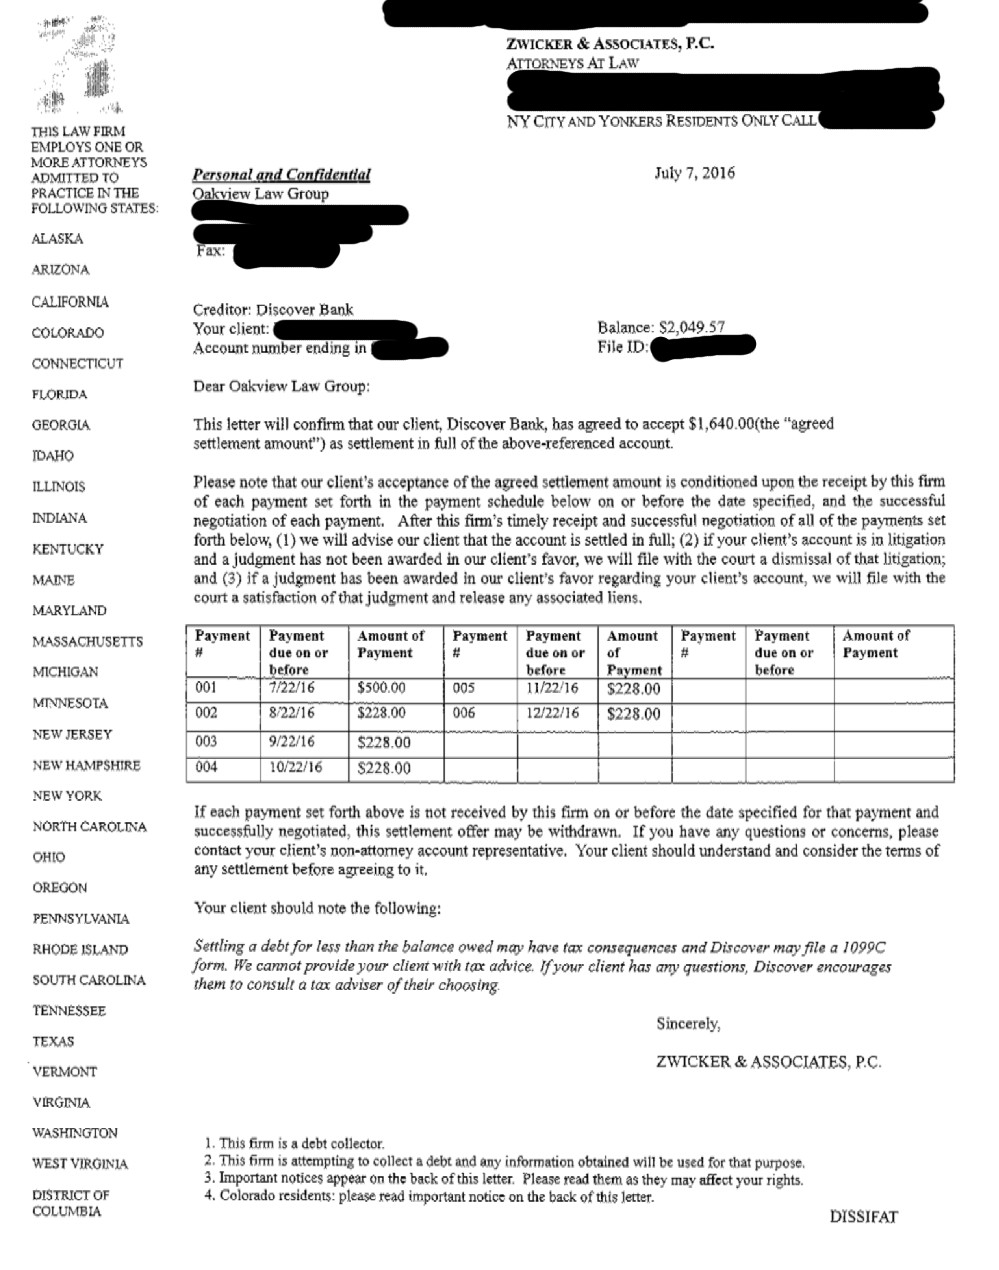 Client BM from NJ saved $12,708